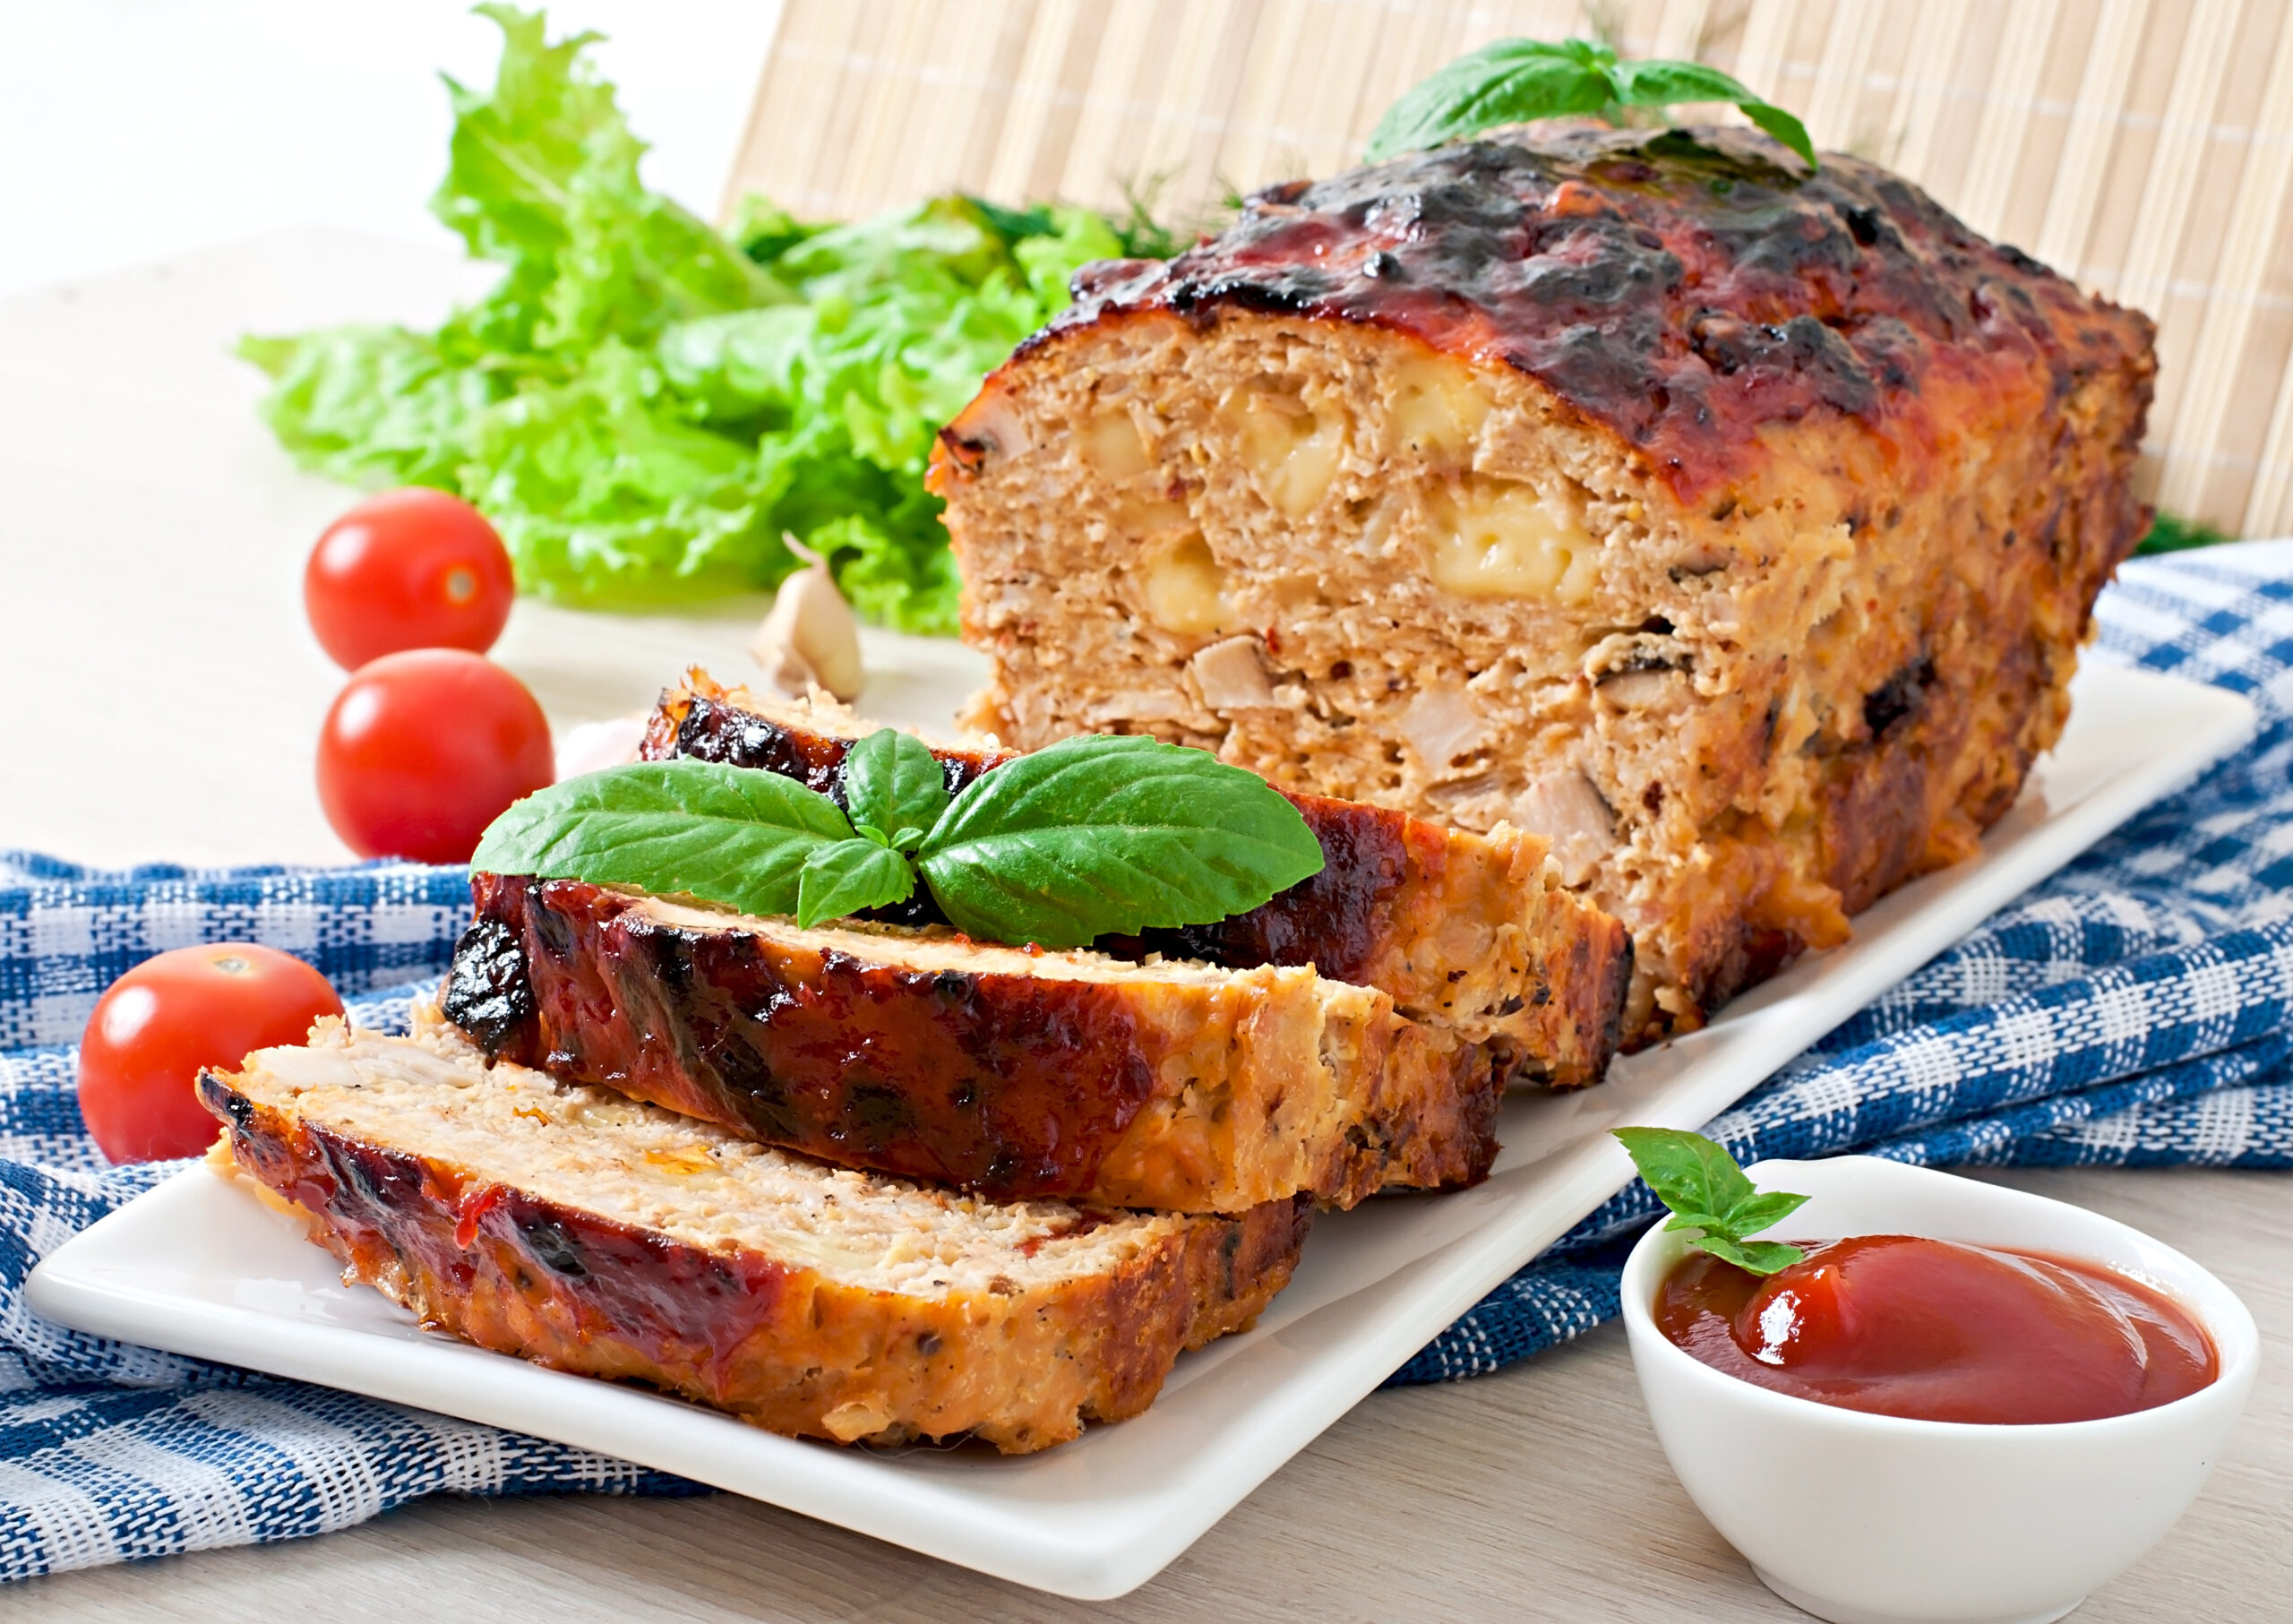 How Long to Cook Meatloaf at 400 Degrees - BlogChef